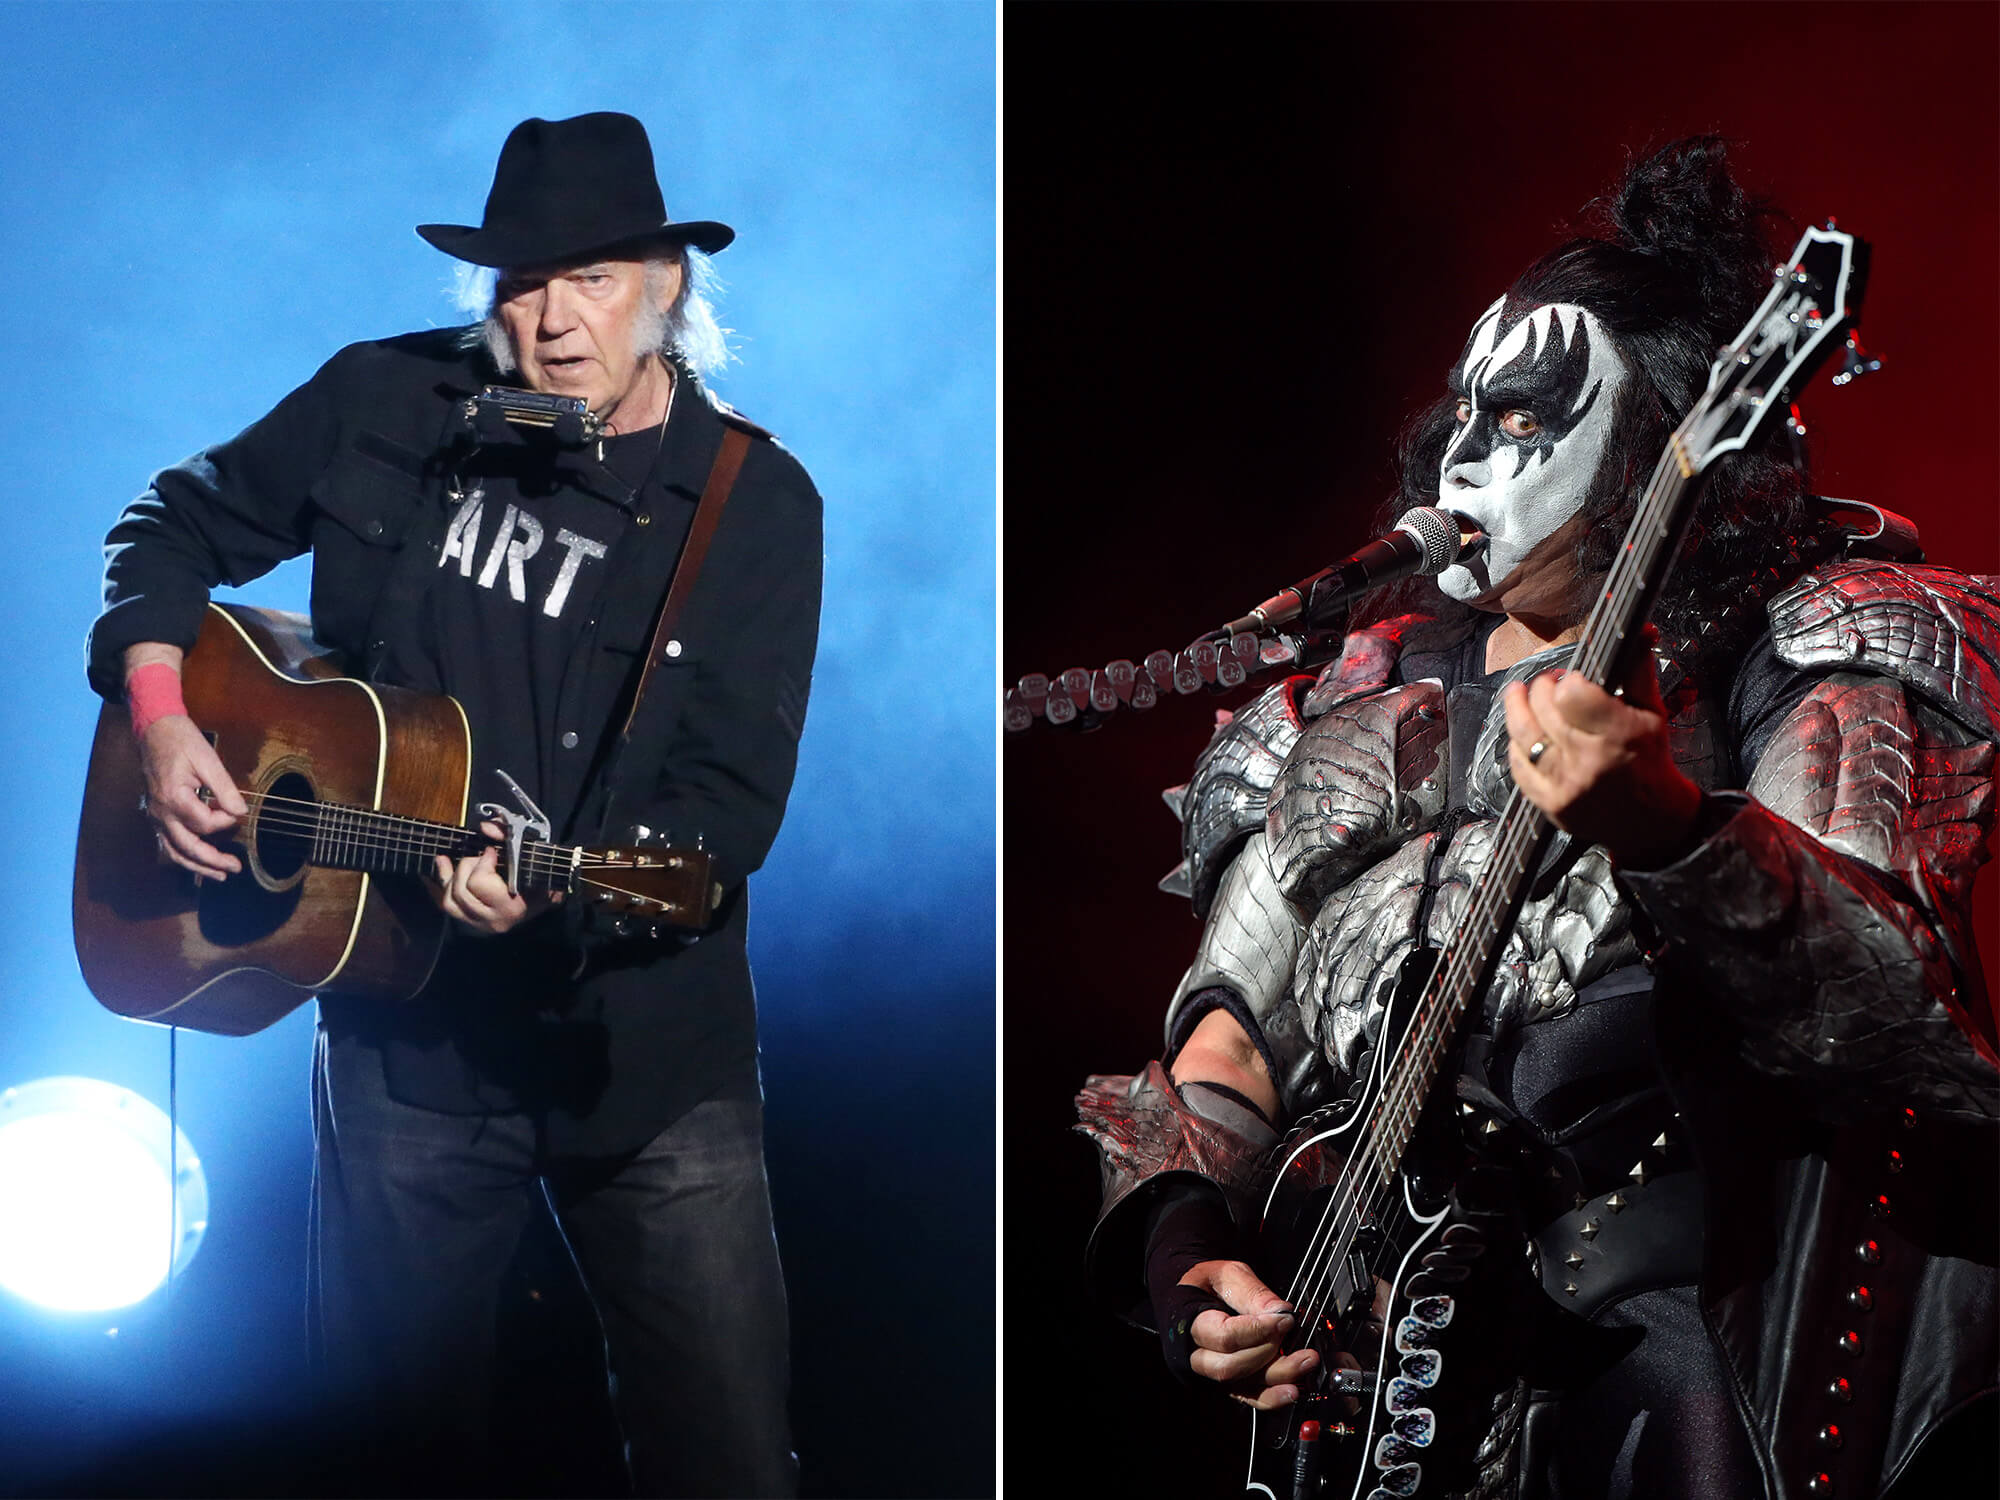 Neil Young (left) playing an acoustic guitar on stage. He is wearing a black hat and black clothes. Gene Simmons (right) with his black and white stage make up on. He is playing bass and singing into a mic.